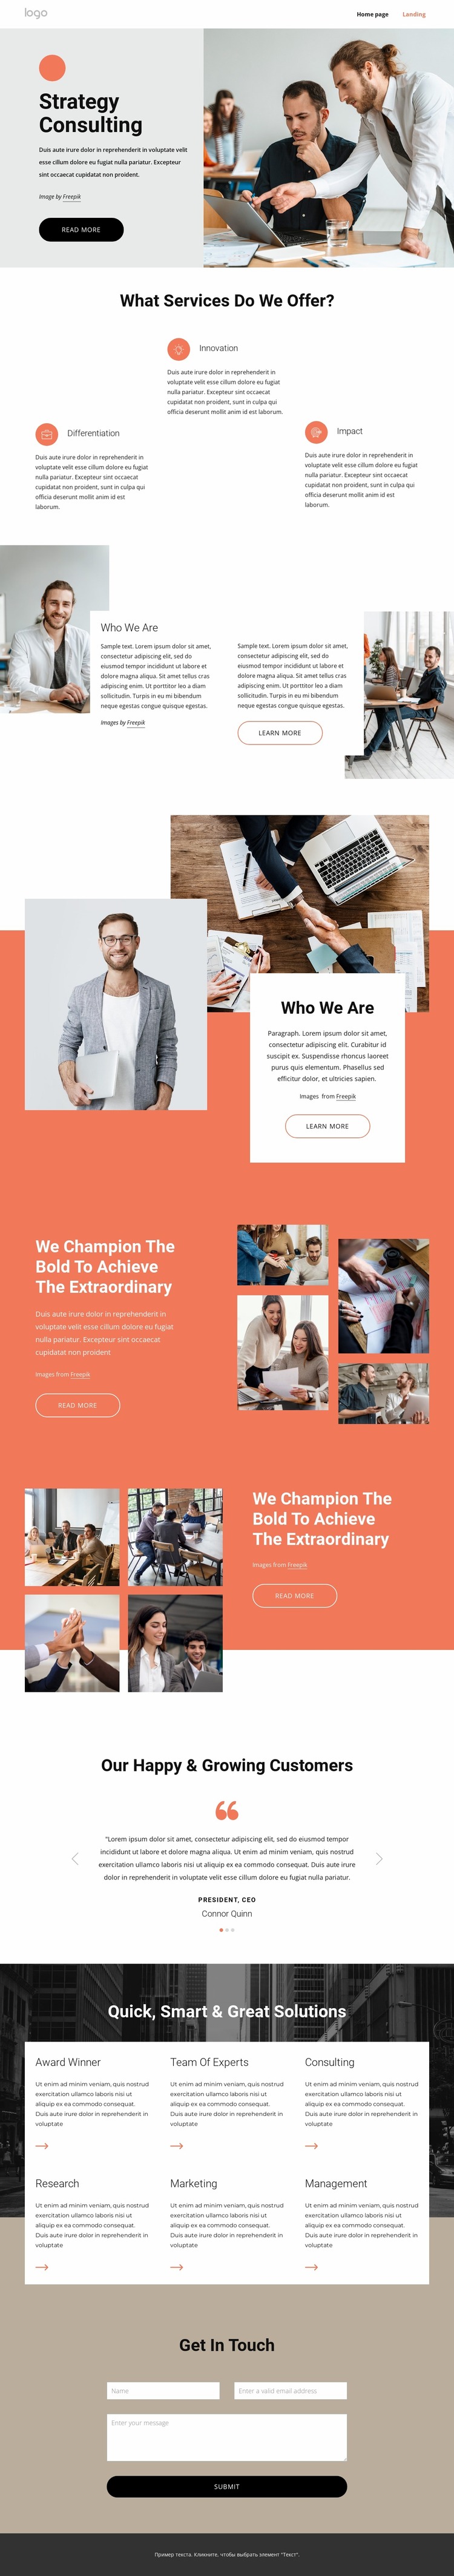 Align your technology strategy Website Mockup